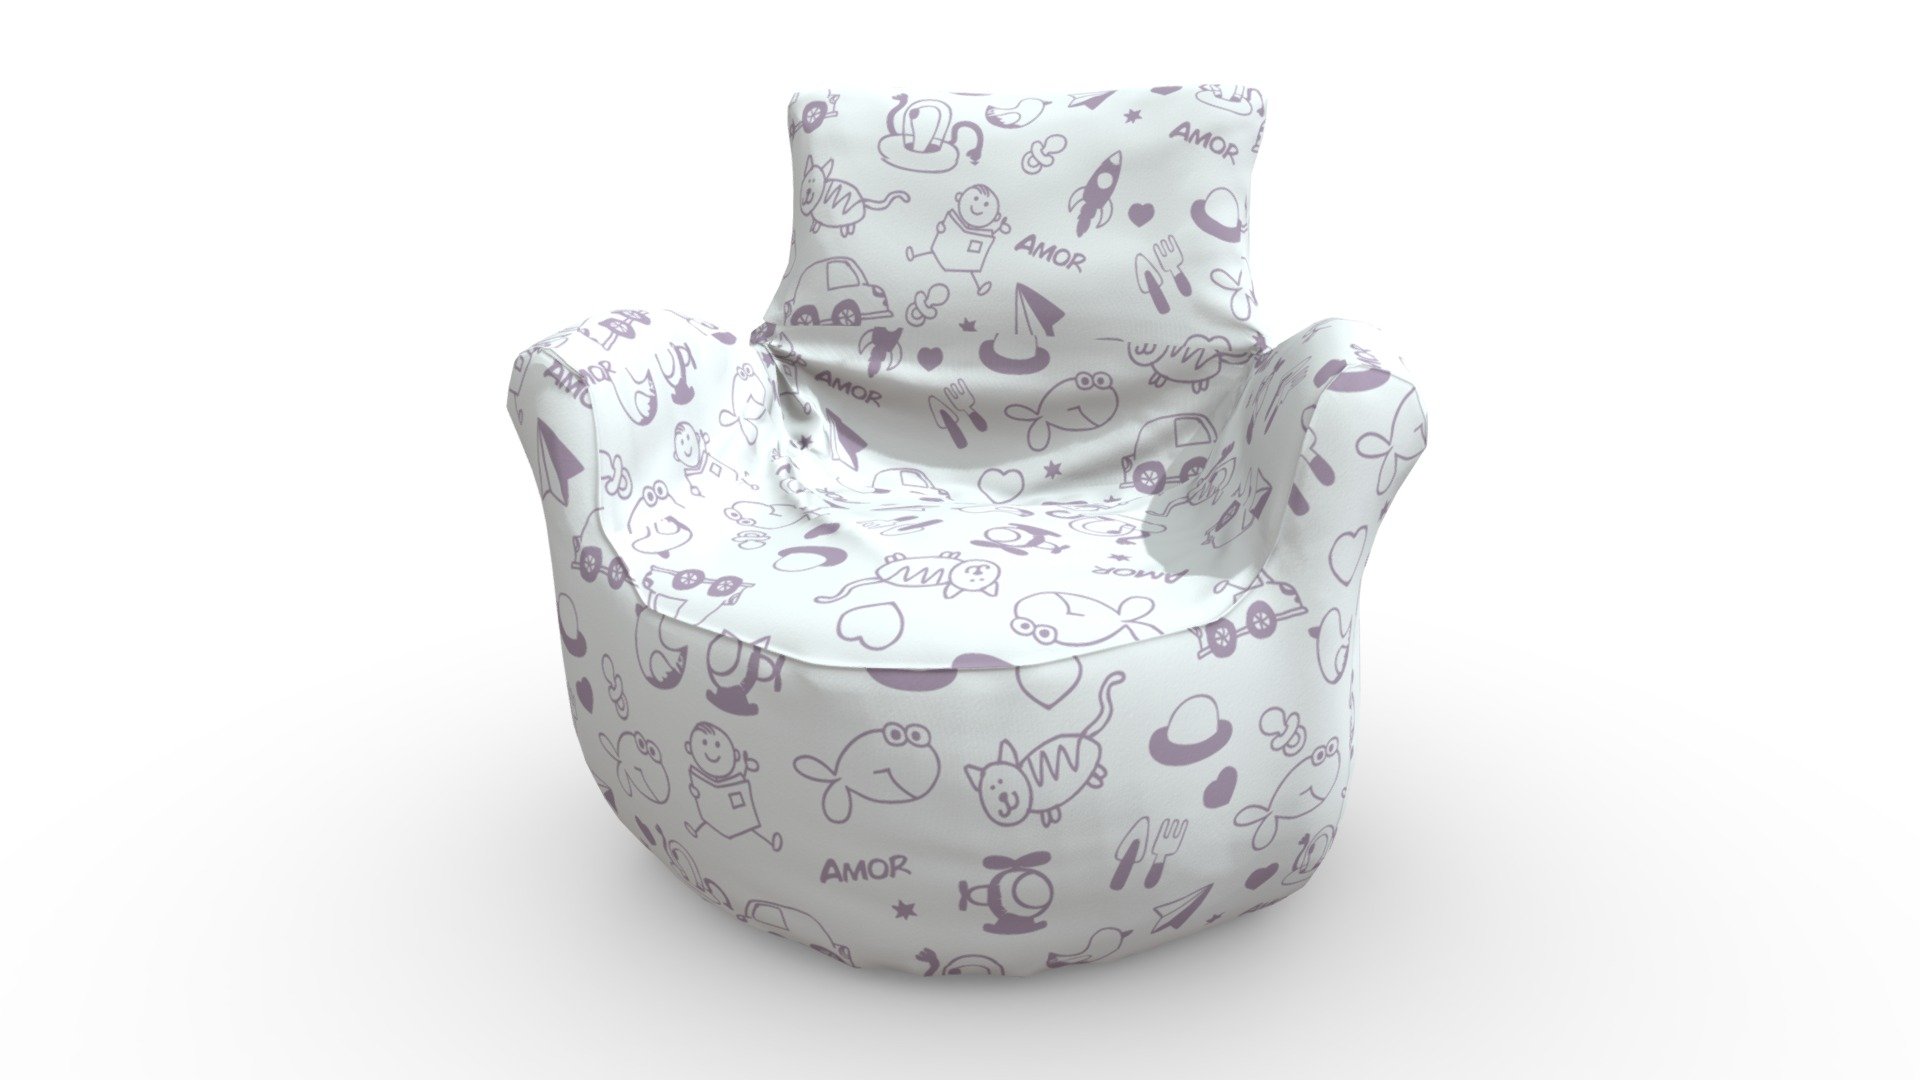 Bean Bag. Inside out brings to you highly detailed, optimized, with PBR materials. Can be used for any project and platform. AR, VR, Anroid, IOS, PC, etc. All maps albedo, normal, roughness, aoc, metallic and height are perfectly created with love and care and optimized for all platforms. Ready to be used in unity or unreal or any other engine.

*All textures are included in the package.

Features: - PBR validated - Super optimized 3D models - HD textures to boost every single detail - VR ready - AR ready - 4k Textures - Arm Chair Bean Bag Kids - Buy Royalty Free 3D model by Inside Out Art (@ranajitdas) 3d model